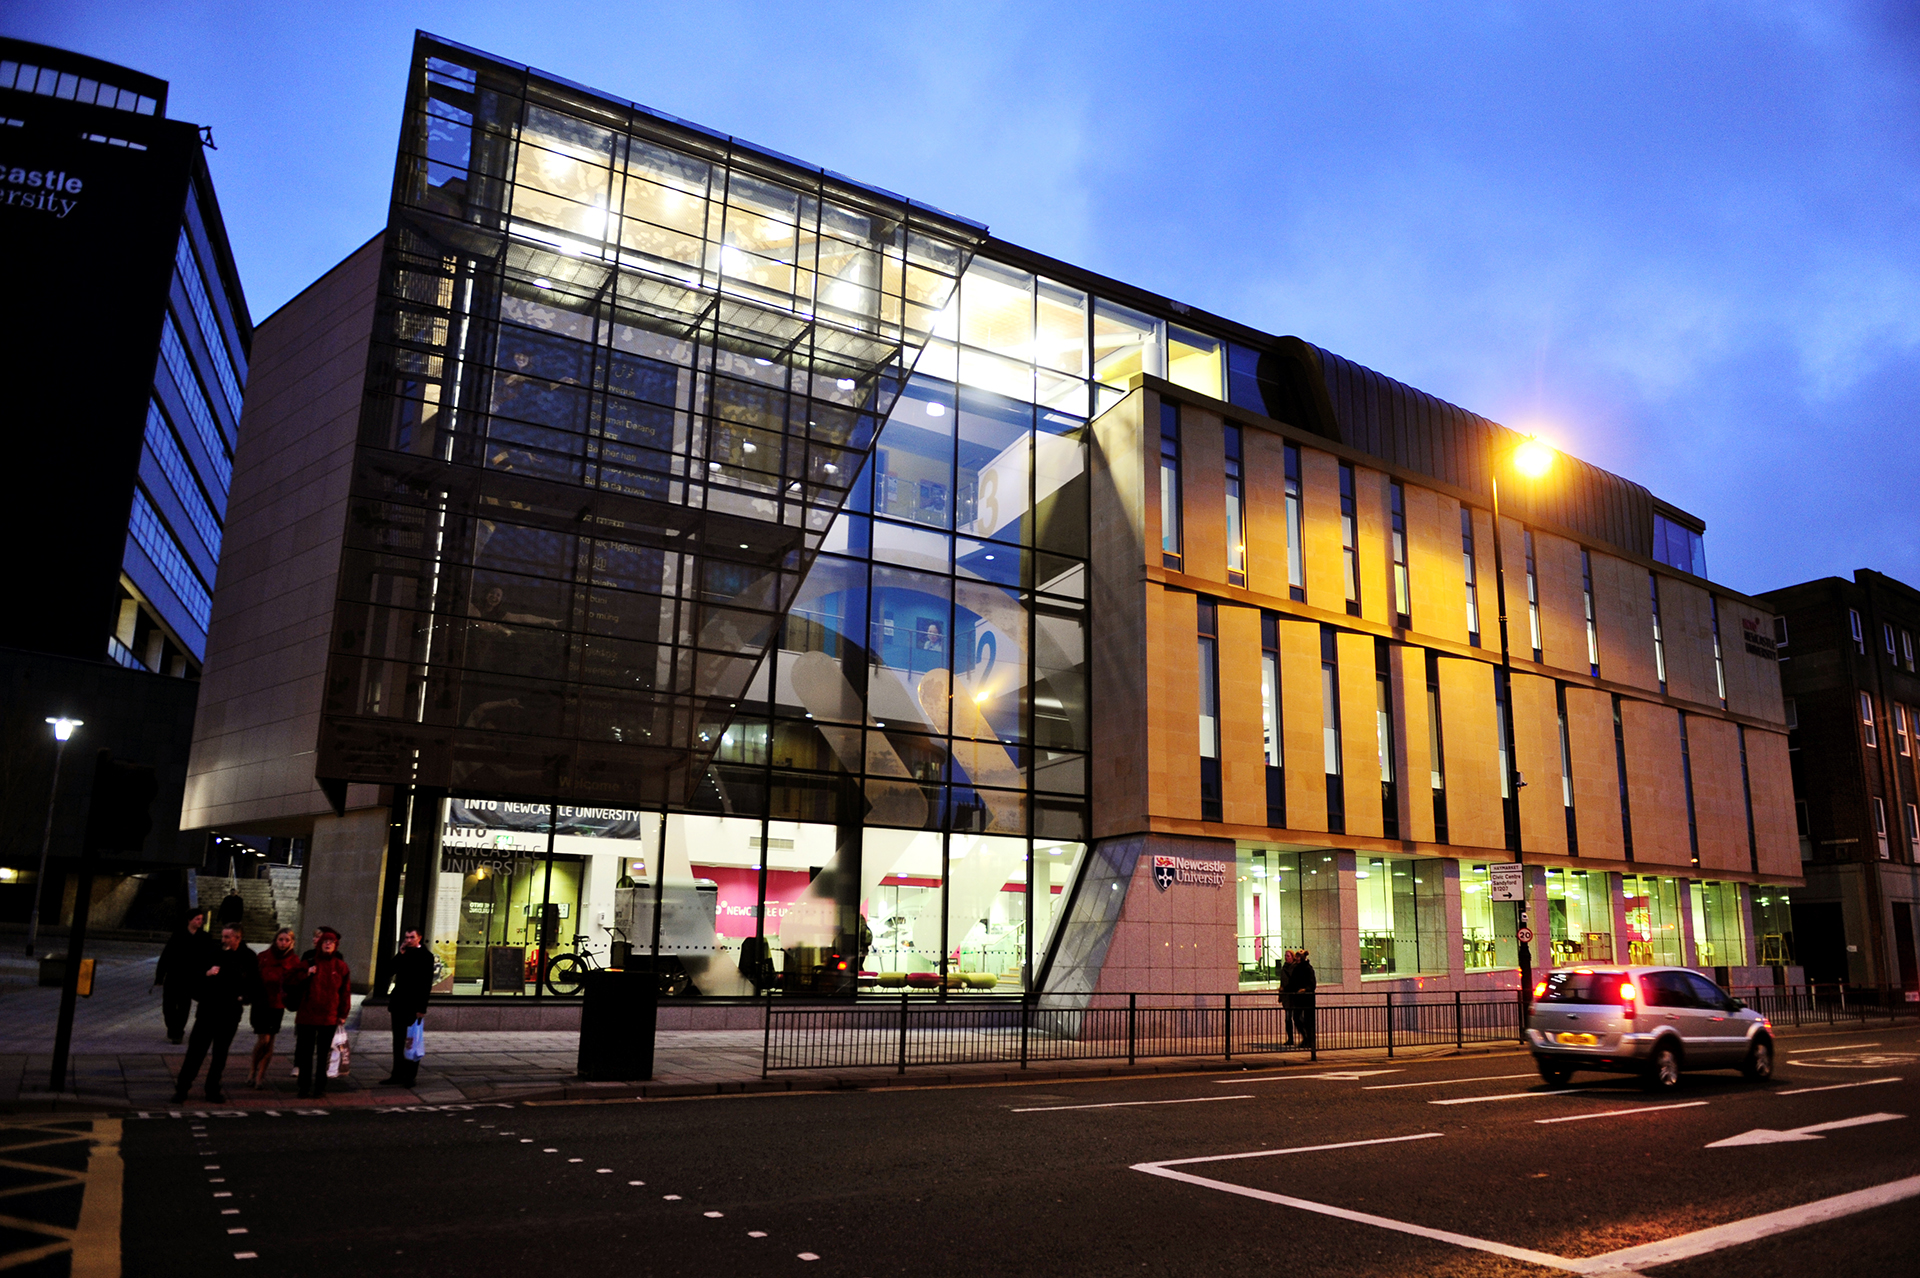 External evening view of the INTO Centre at Newcastle University